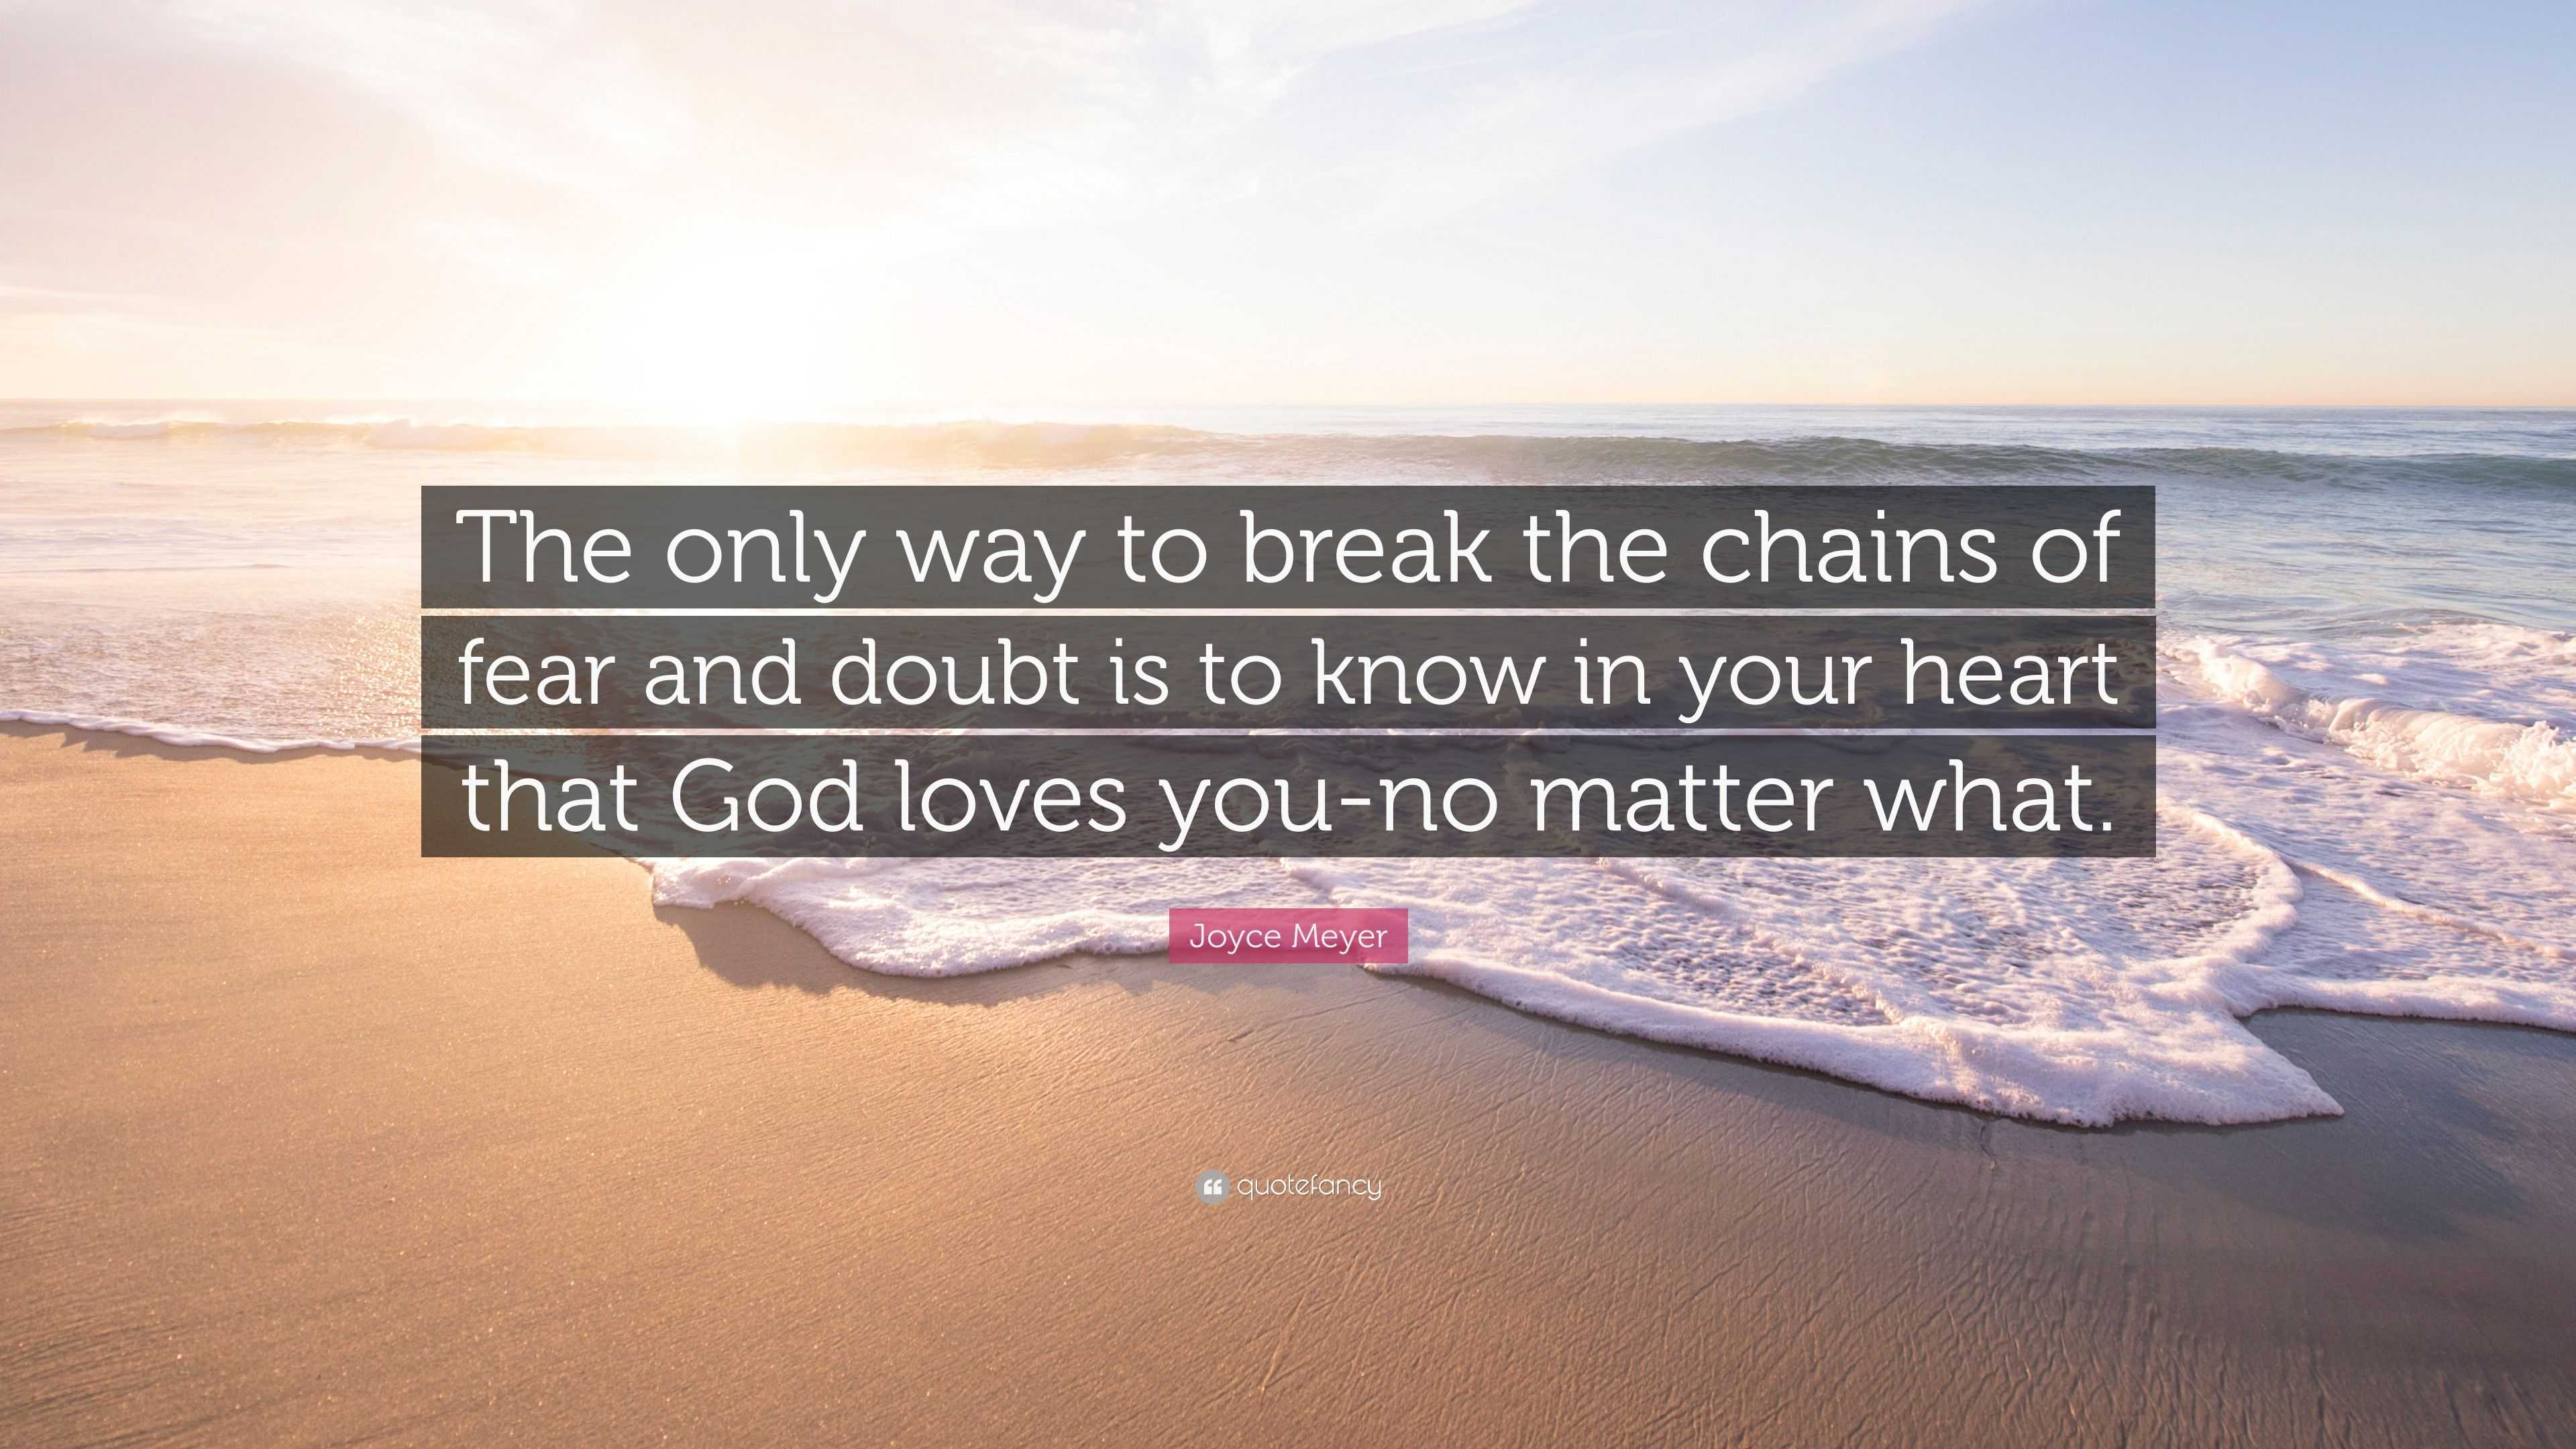 Joyce Meyer Quote “The only way to break the chains of fear and doubt